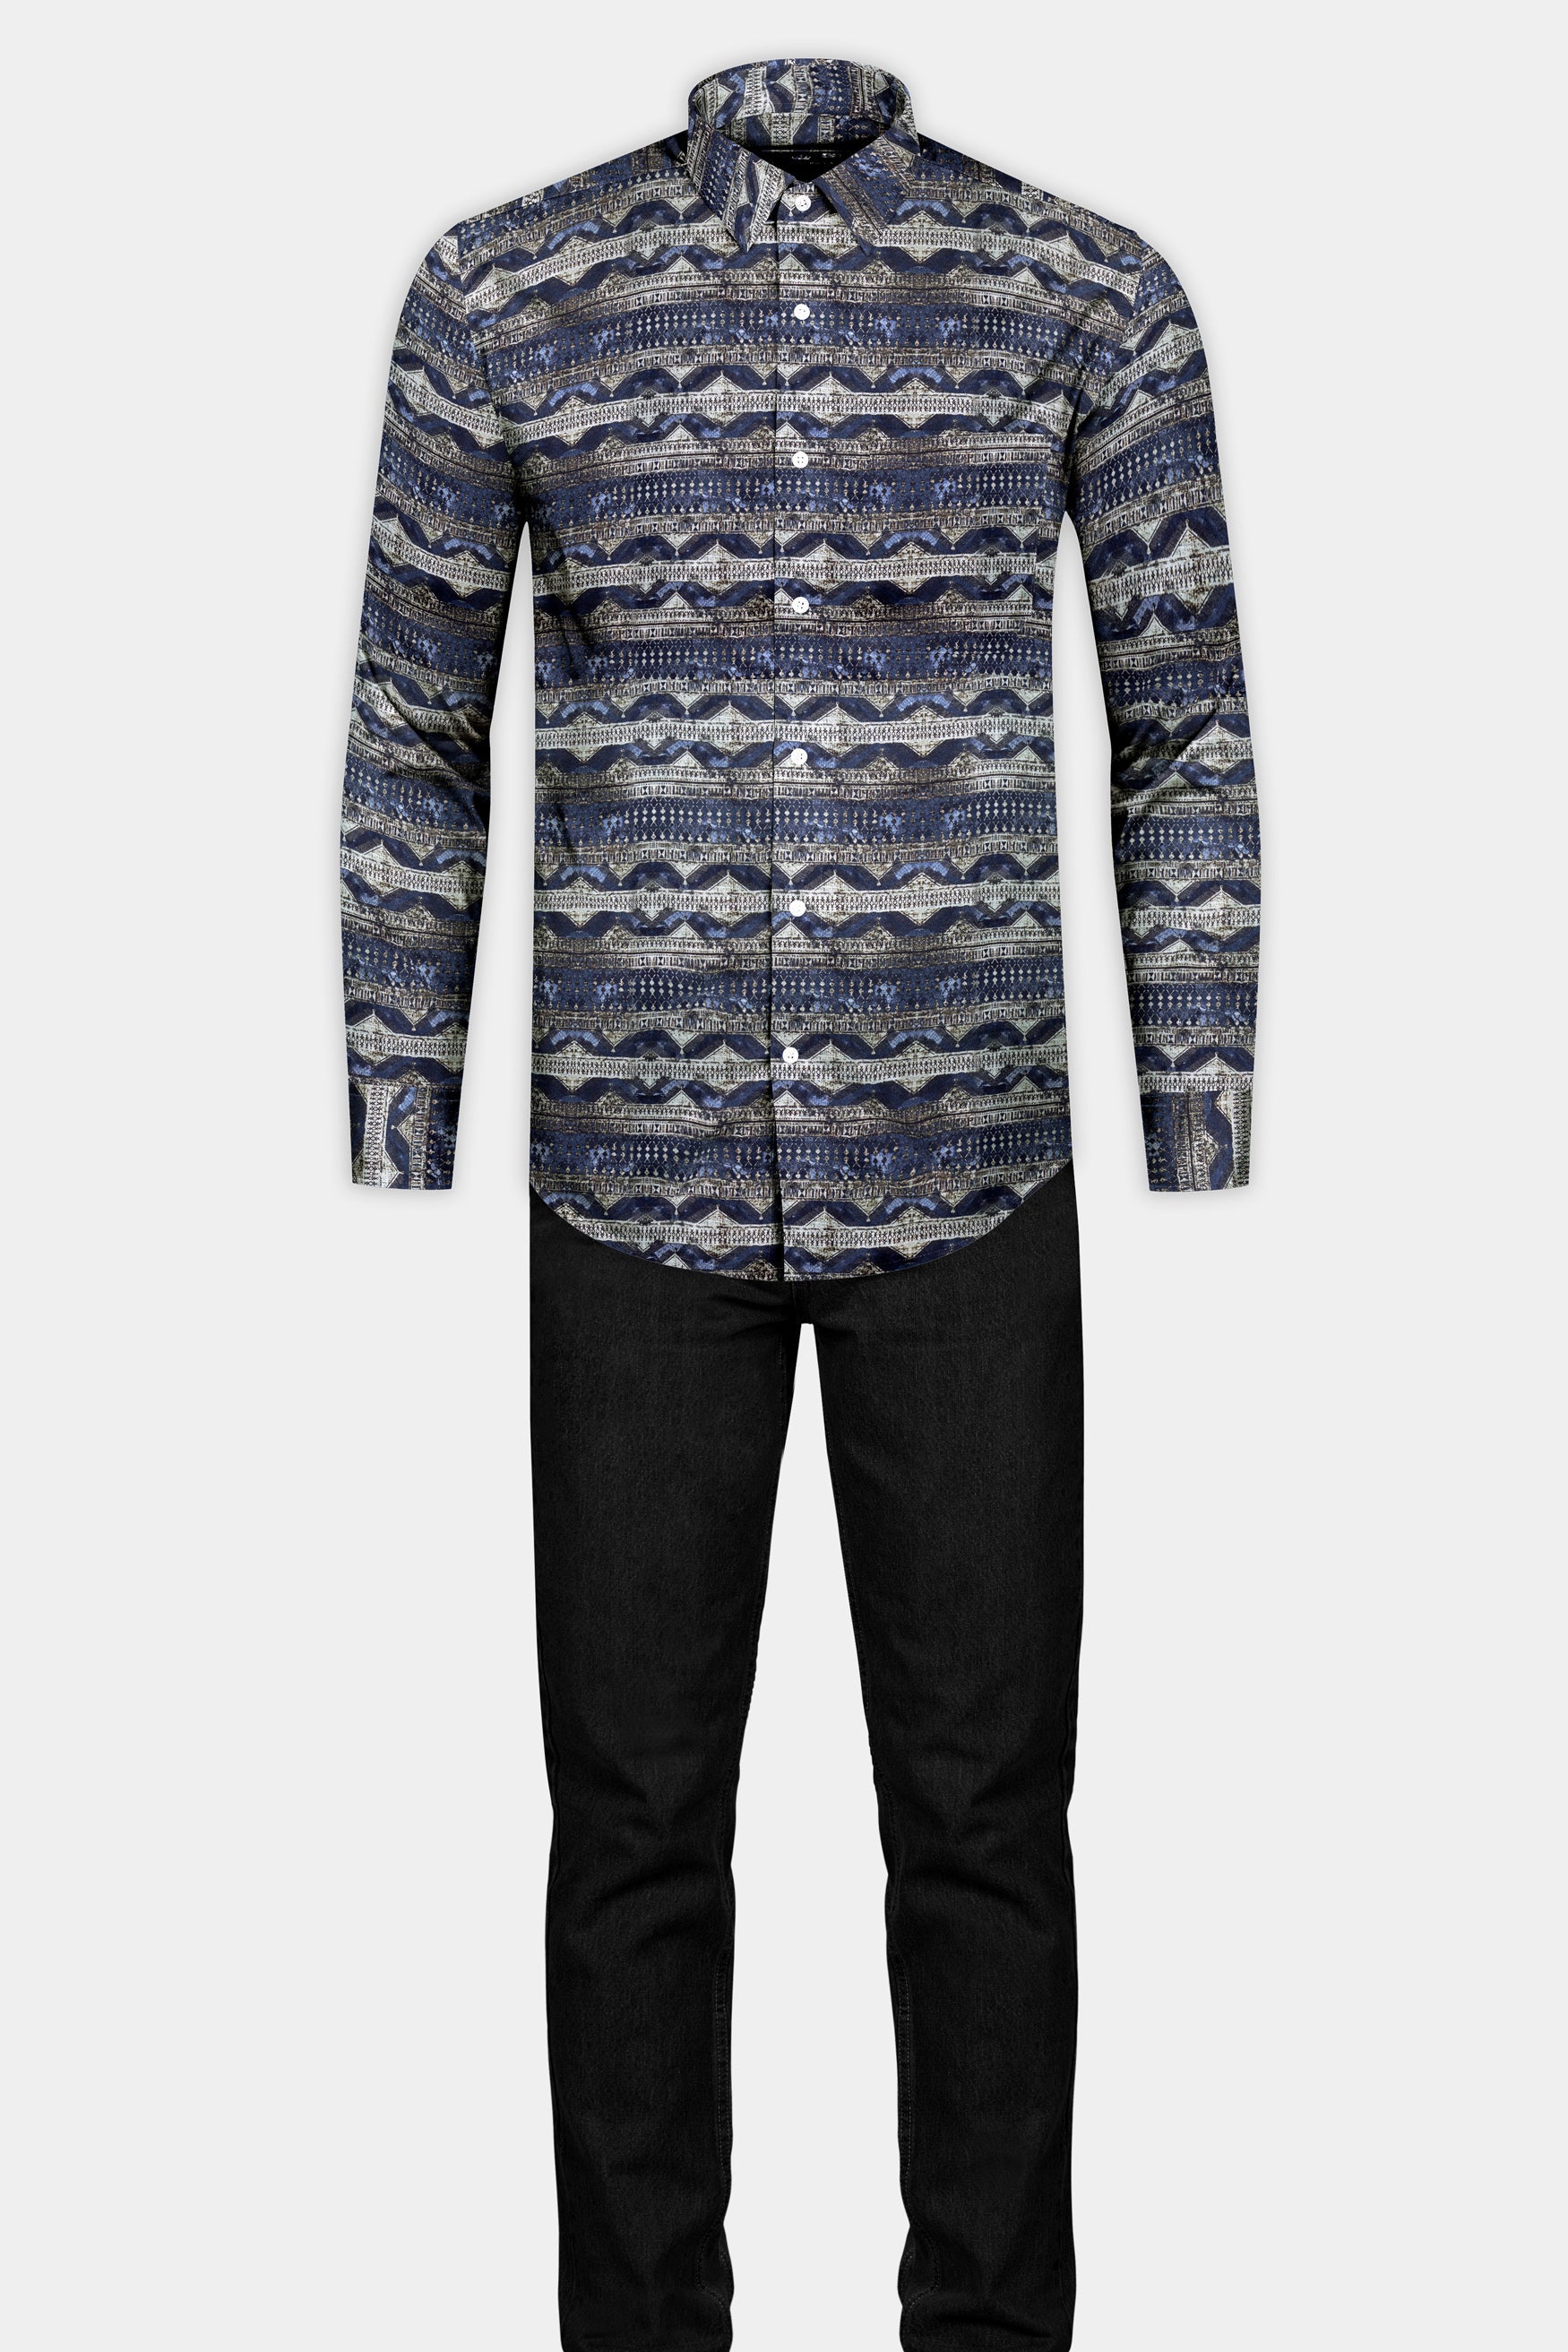 Space Blue and Westar Gray Tribal Printed Subtle Sheen Super Soft Premium Cotton Shirt